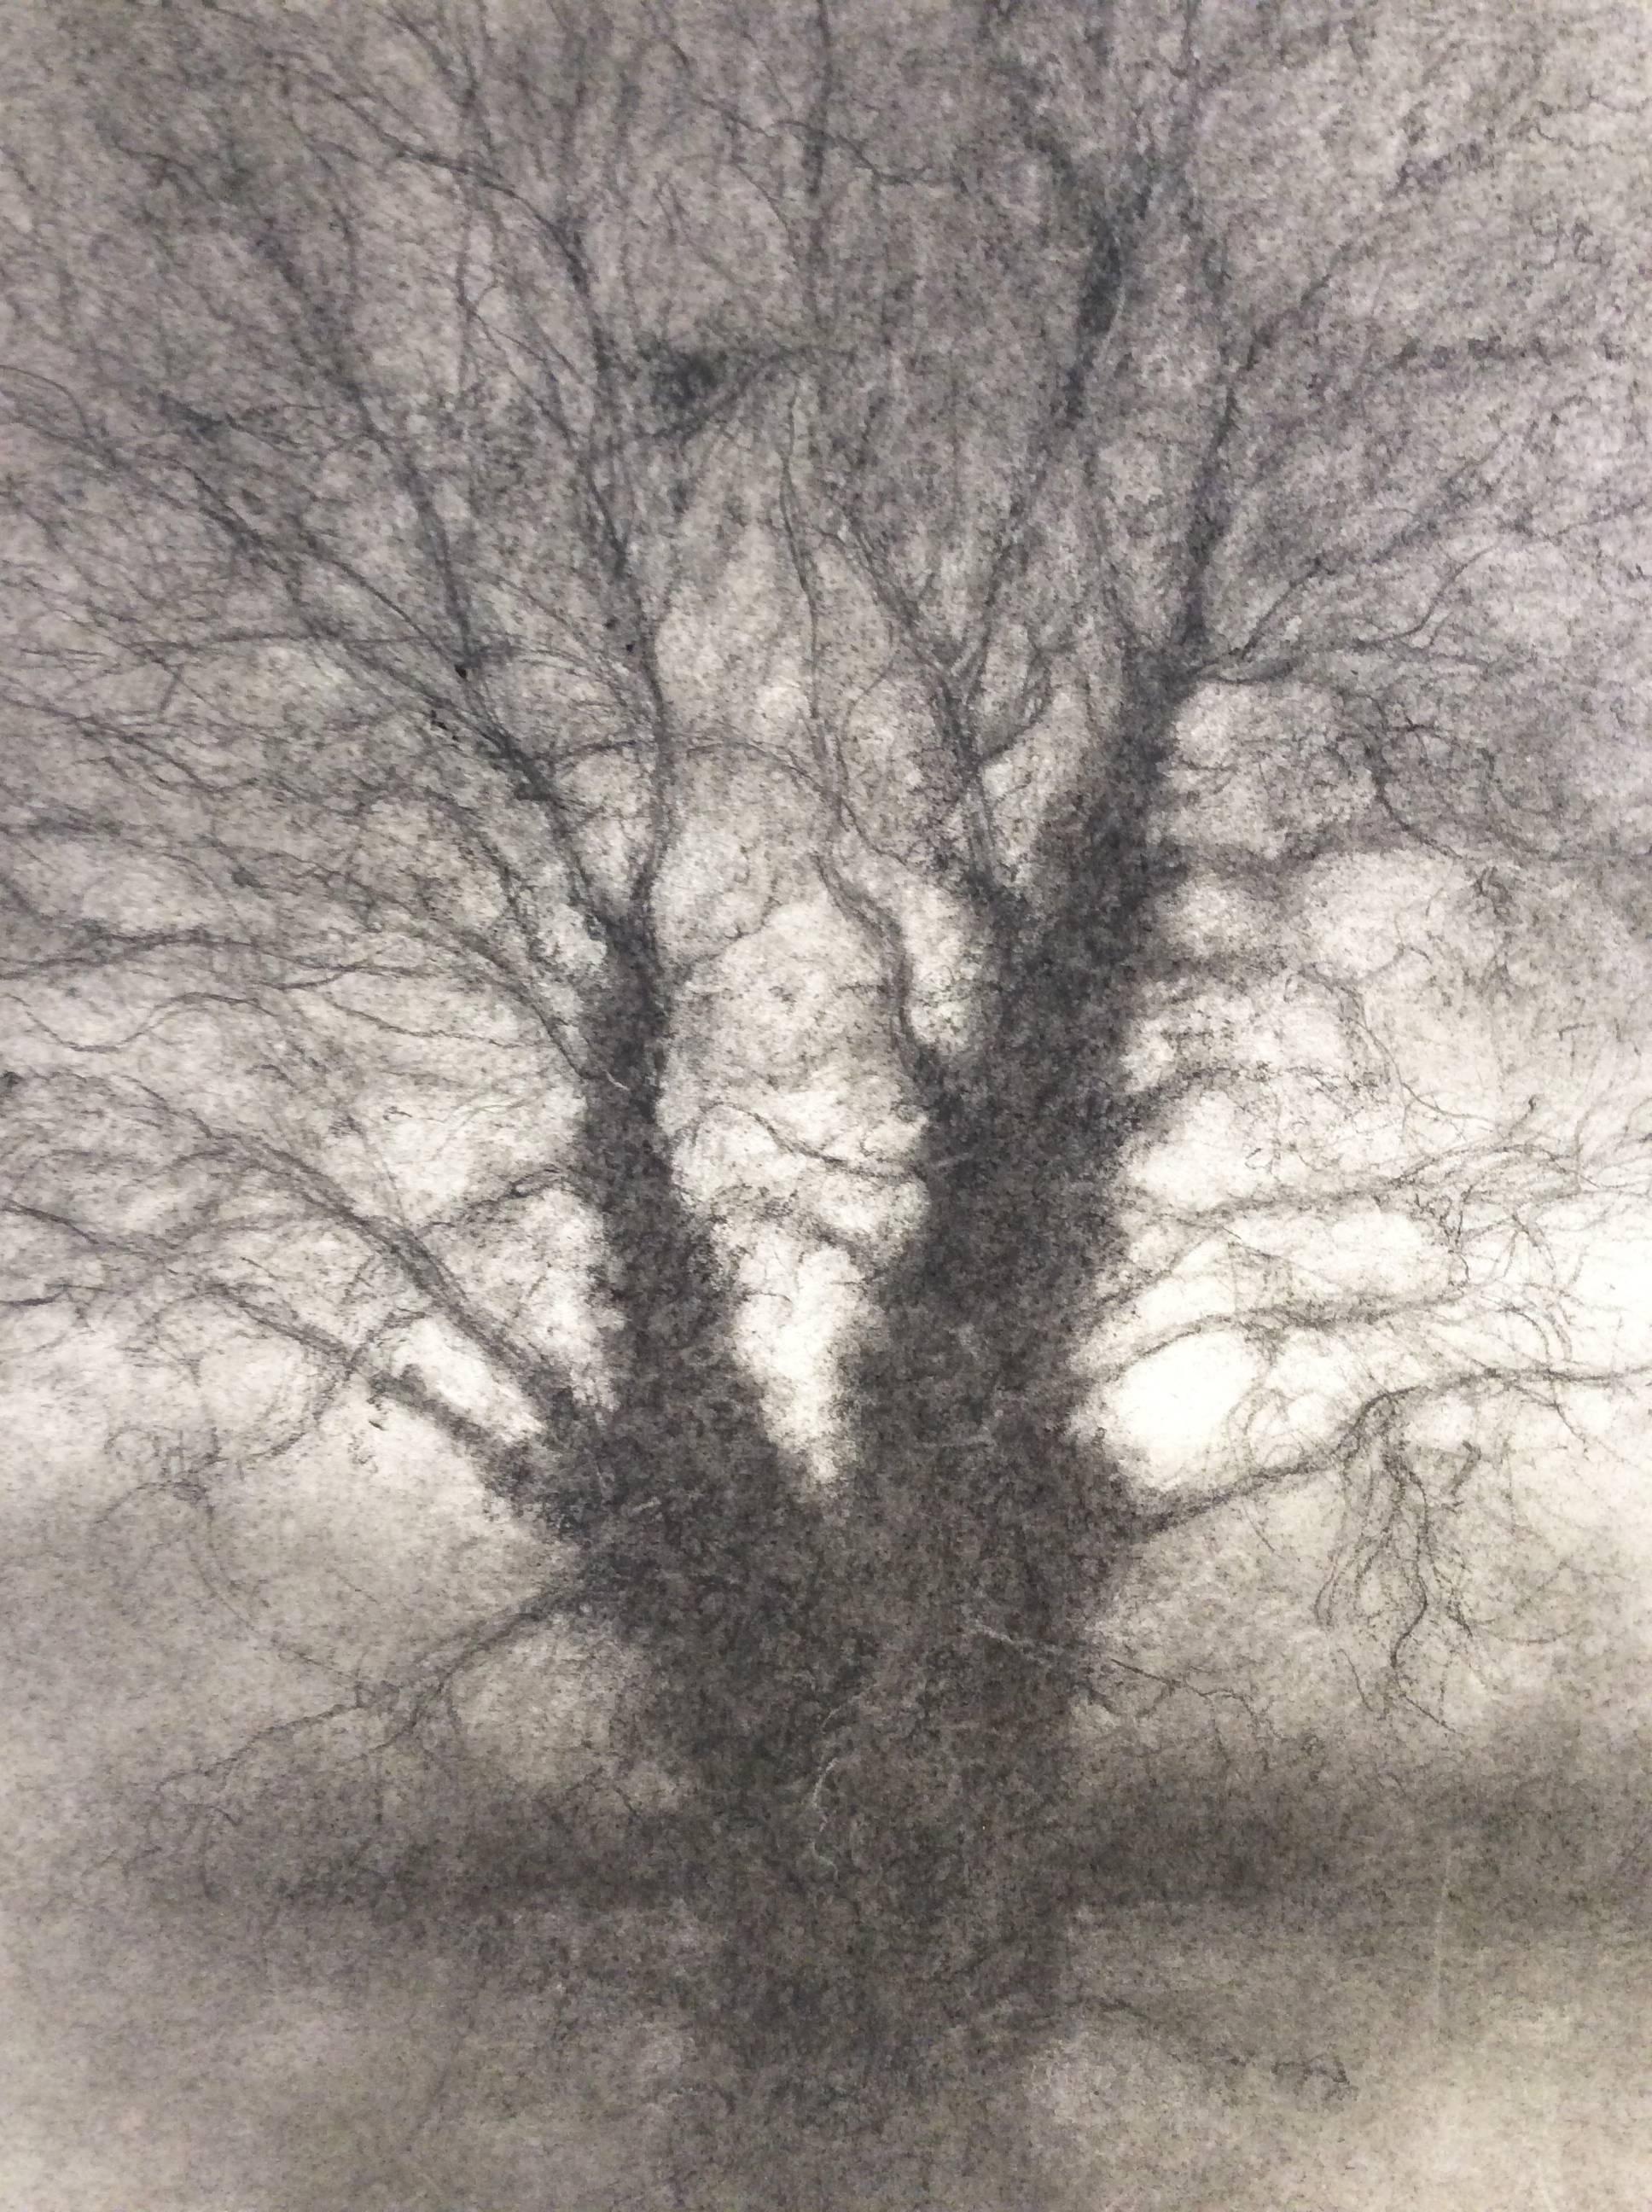 charcoal drawings of trees